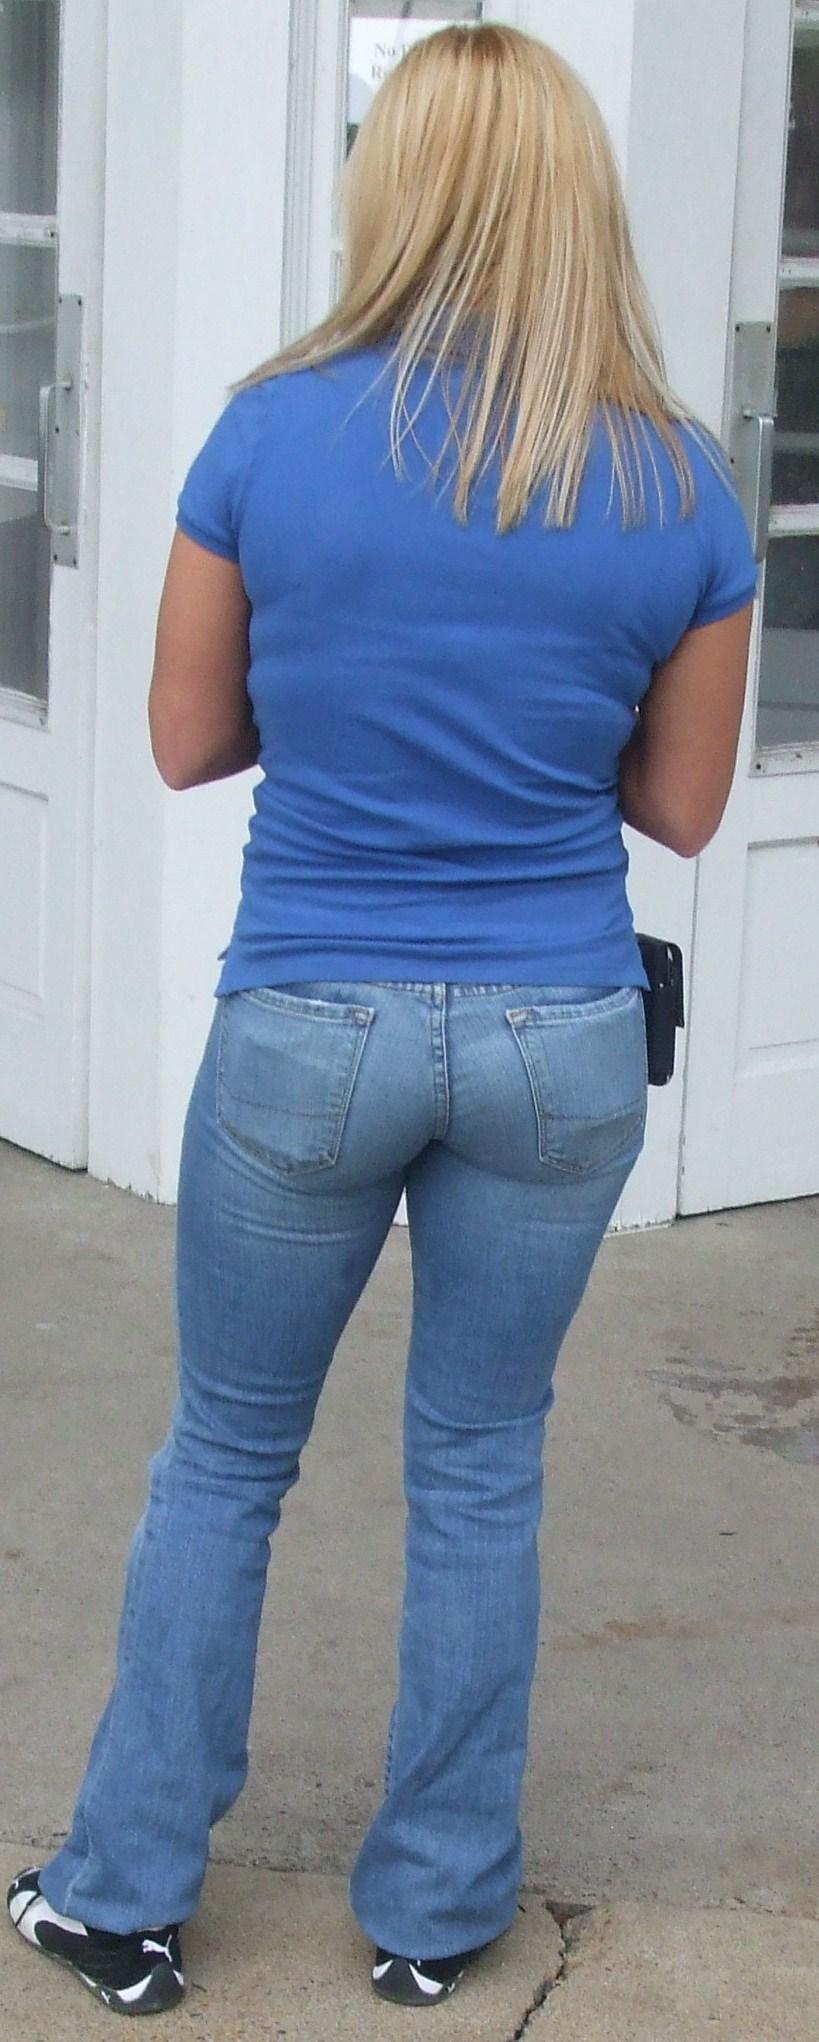 Teen Jeans Amateur - Tight Jeans - Blow Job On Yuvutu Homemade Amateur Porn Movies And XXX Sex  Videos